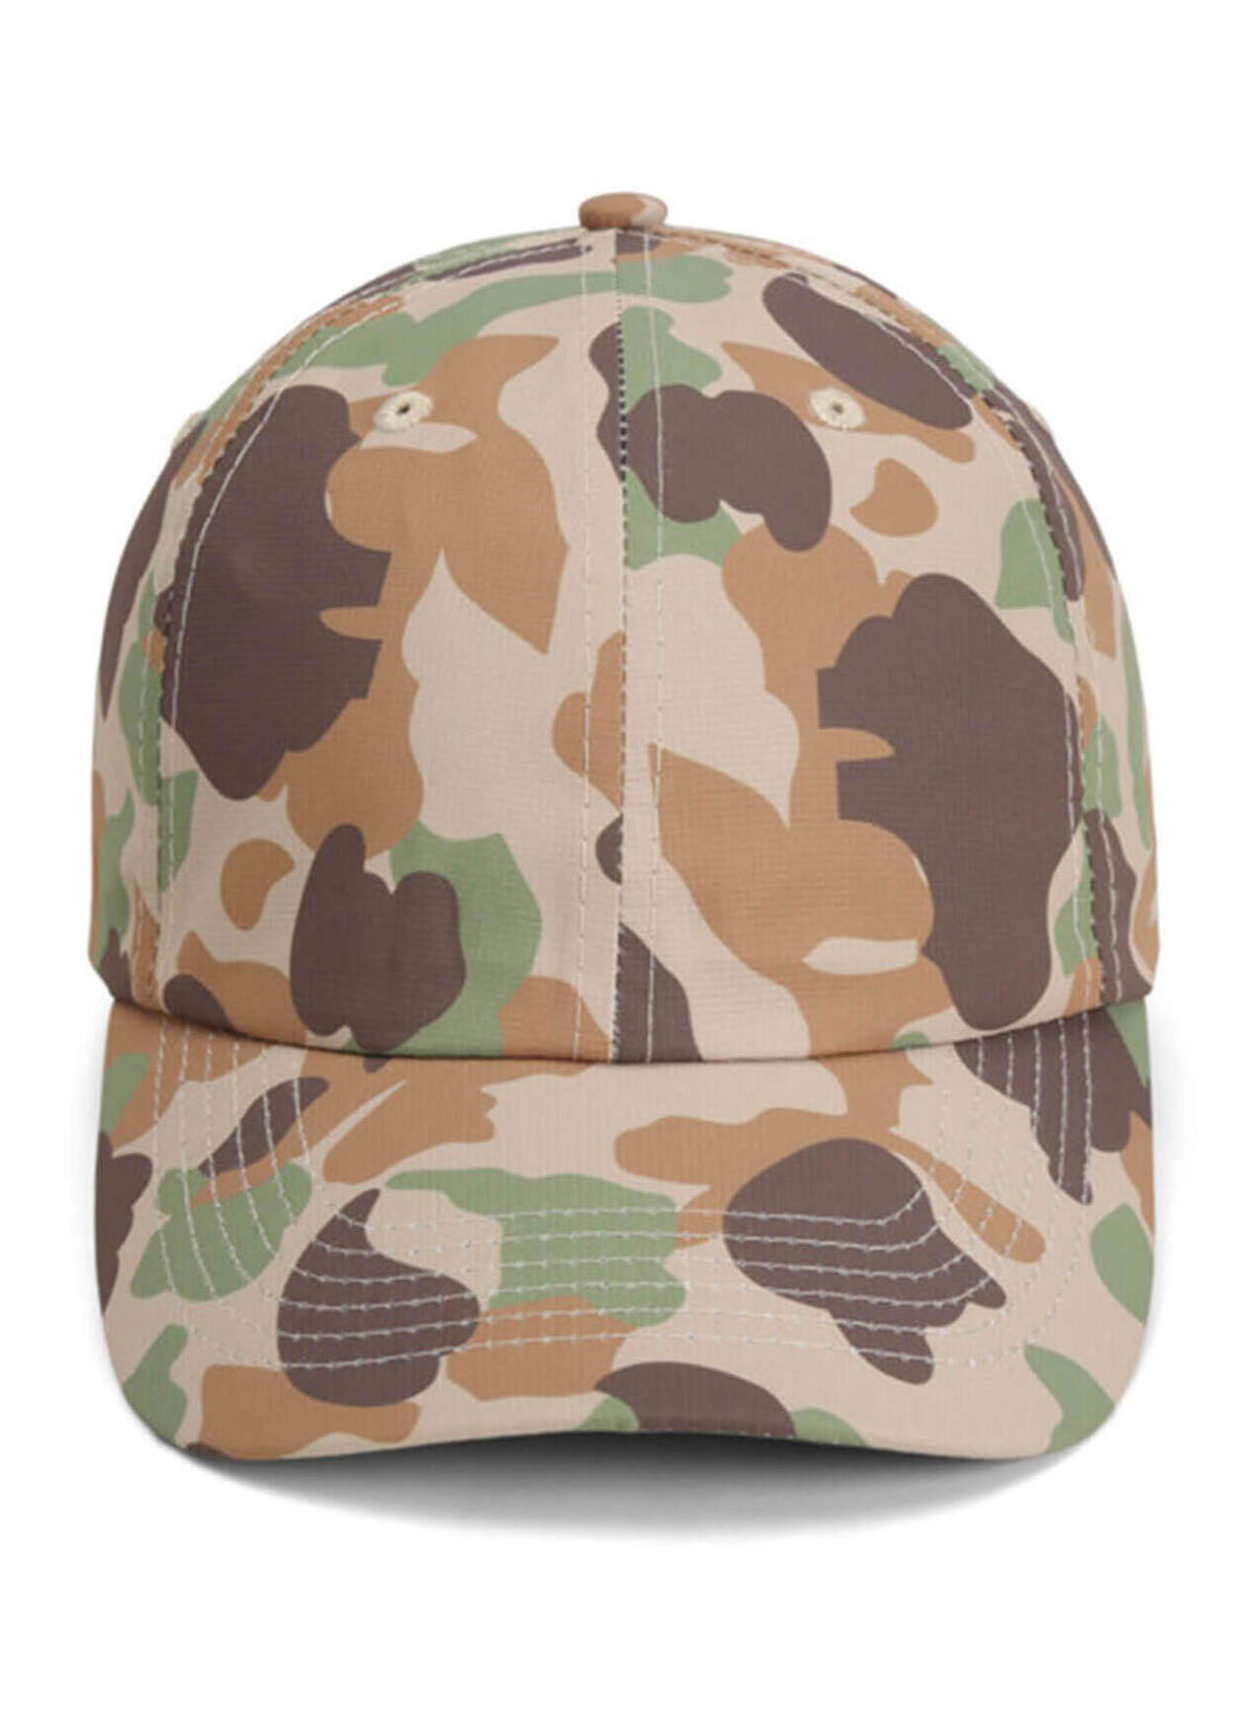 Imperial Frog Camo Brown The Alter Ego Pattered Performance Hat